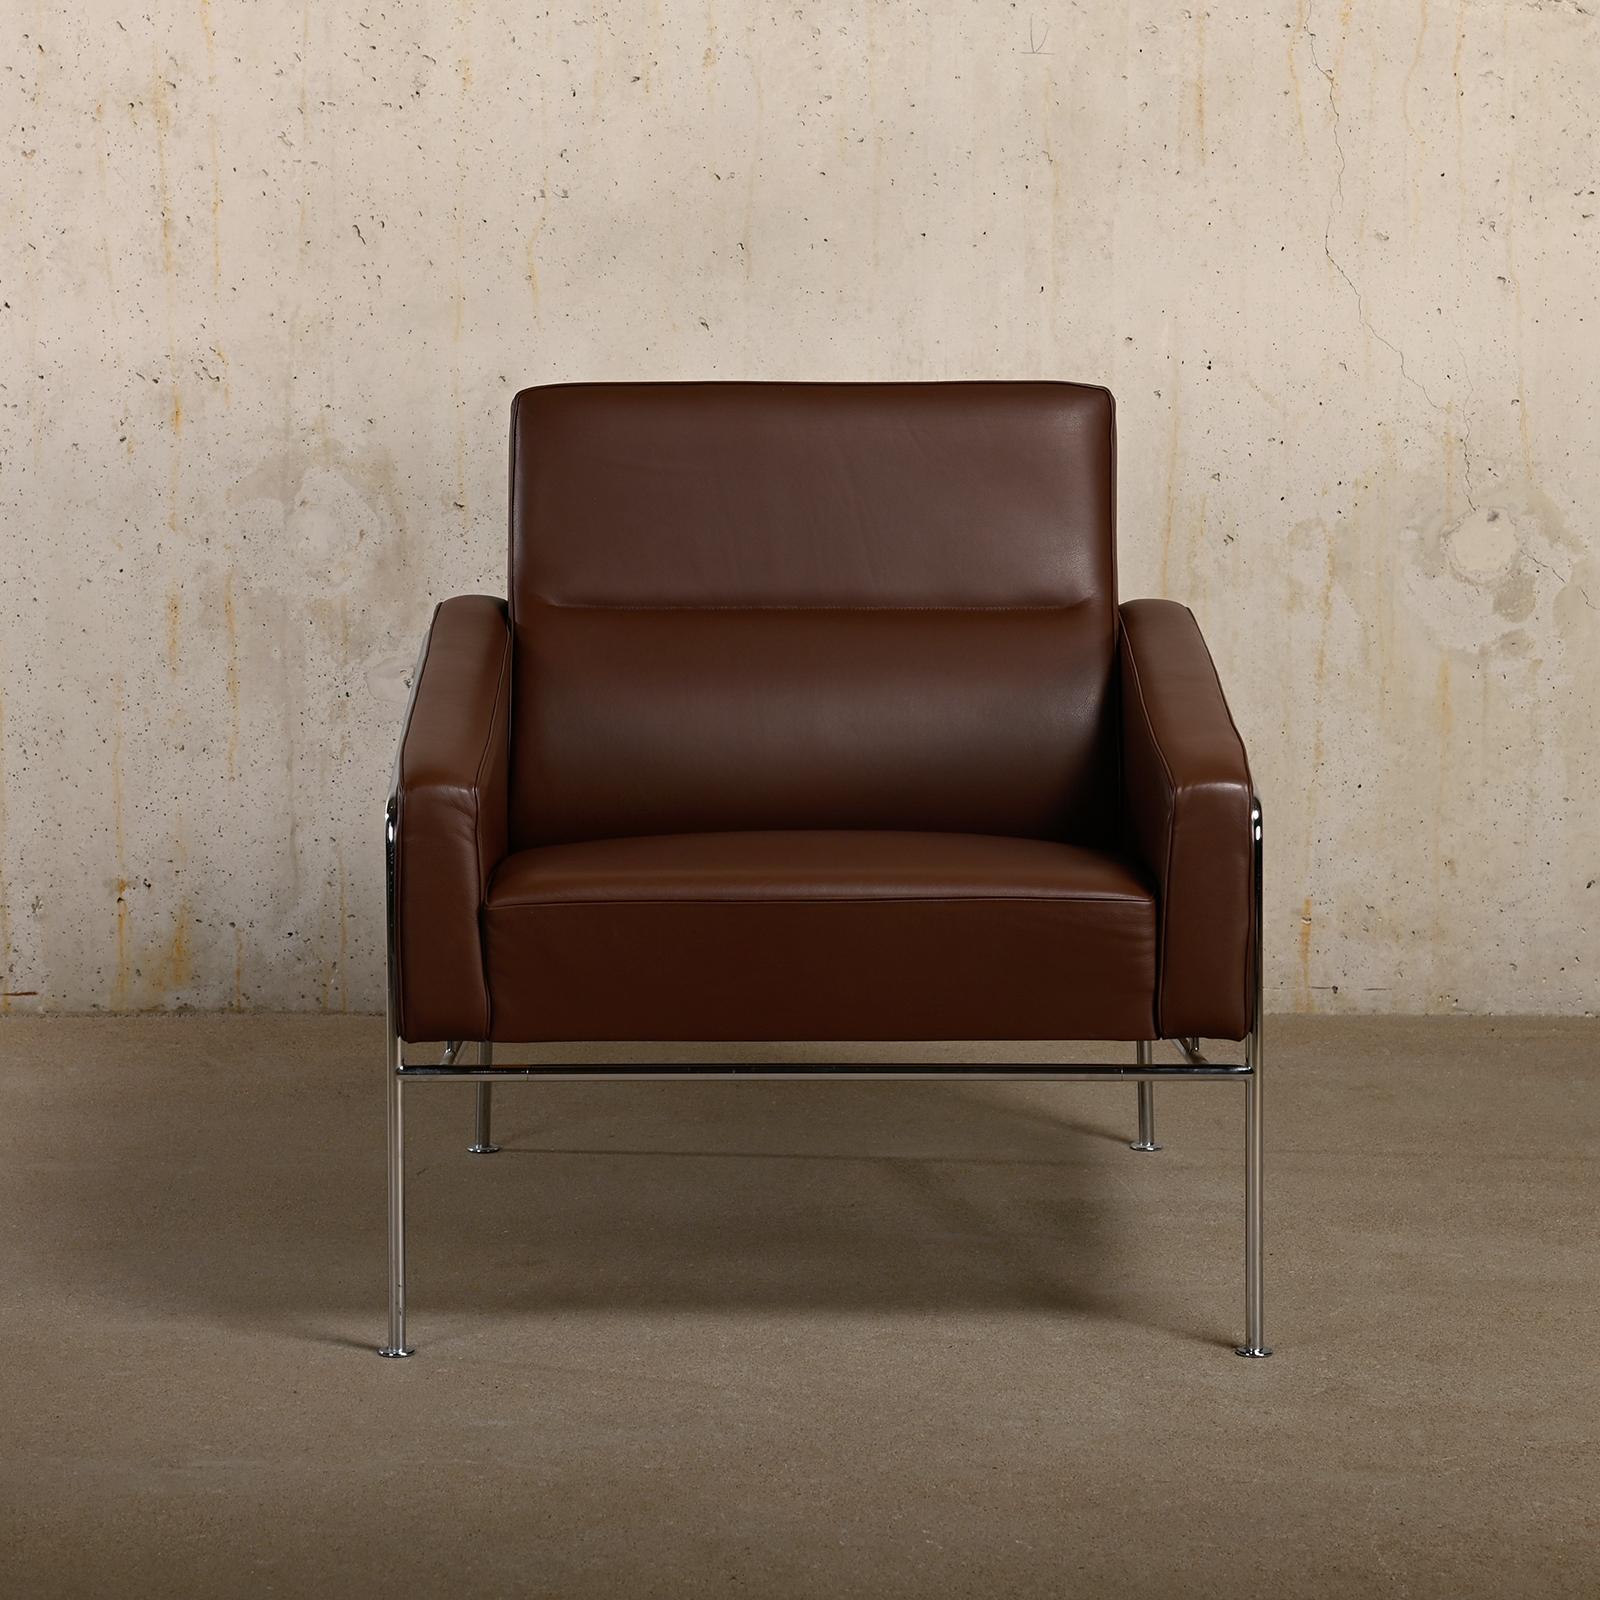 Metal Arne Jacobsen Pair Armchairs 3300 Series in Chestnut leather for Fritz Hansen For Sale